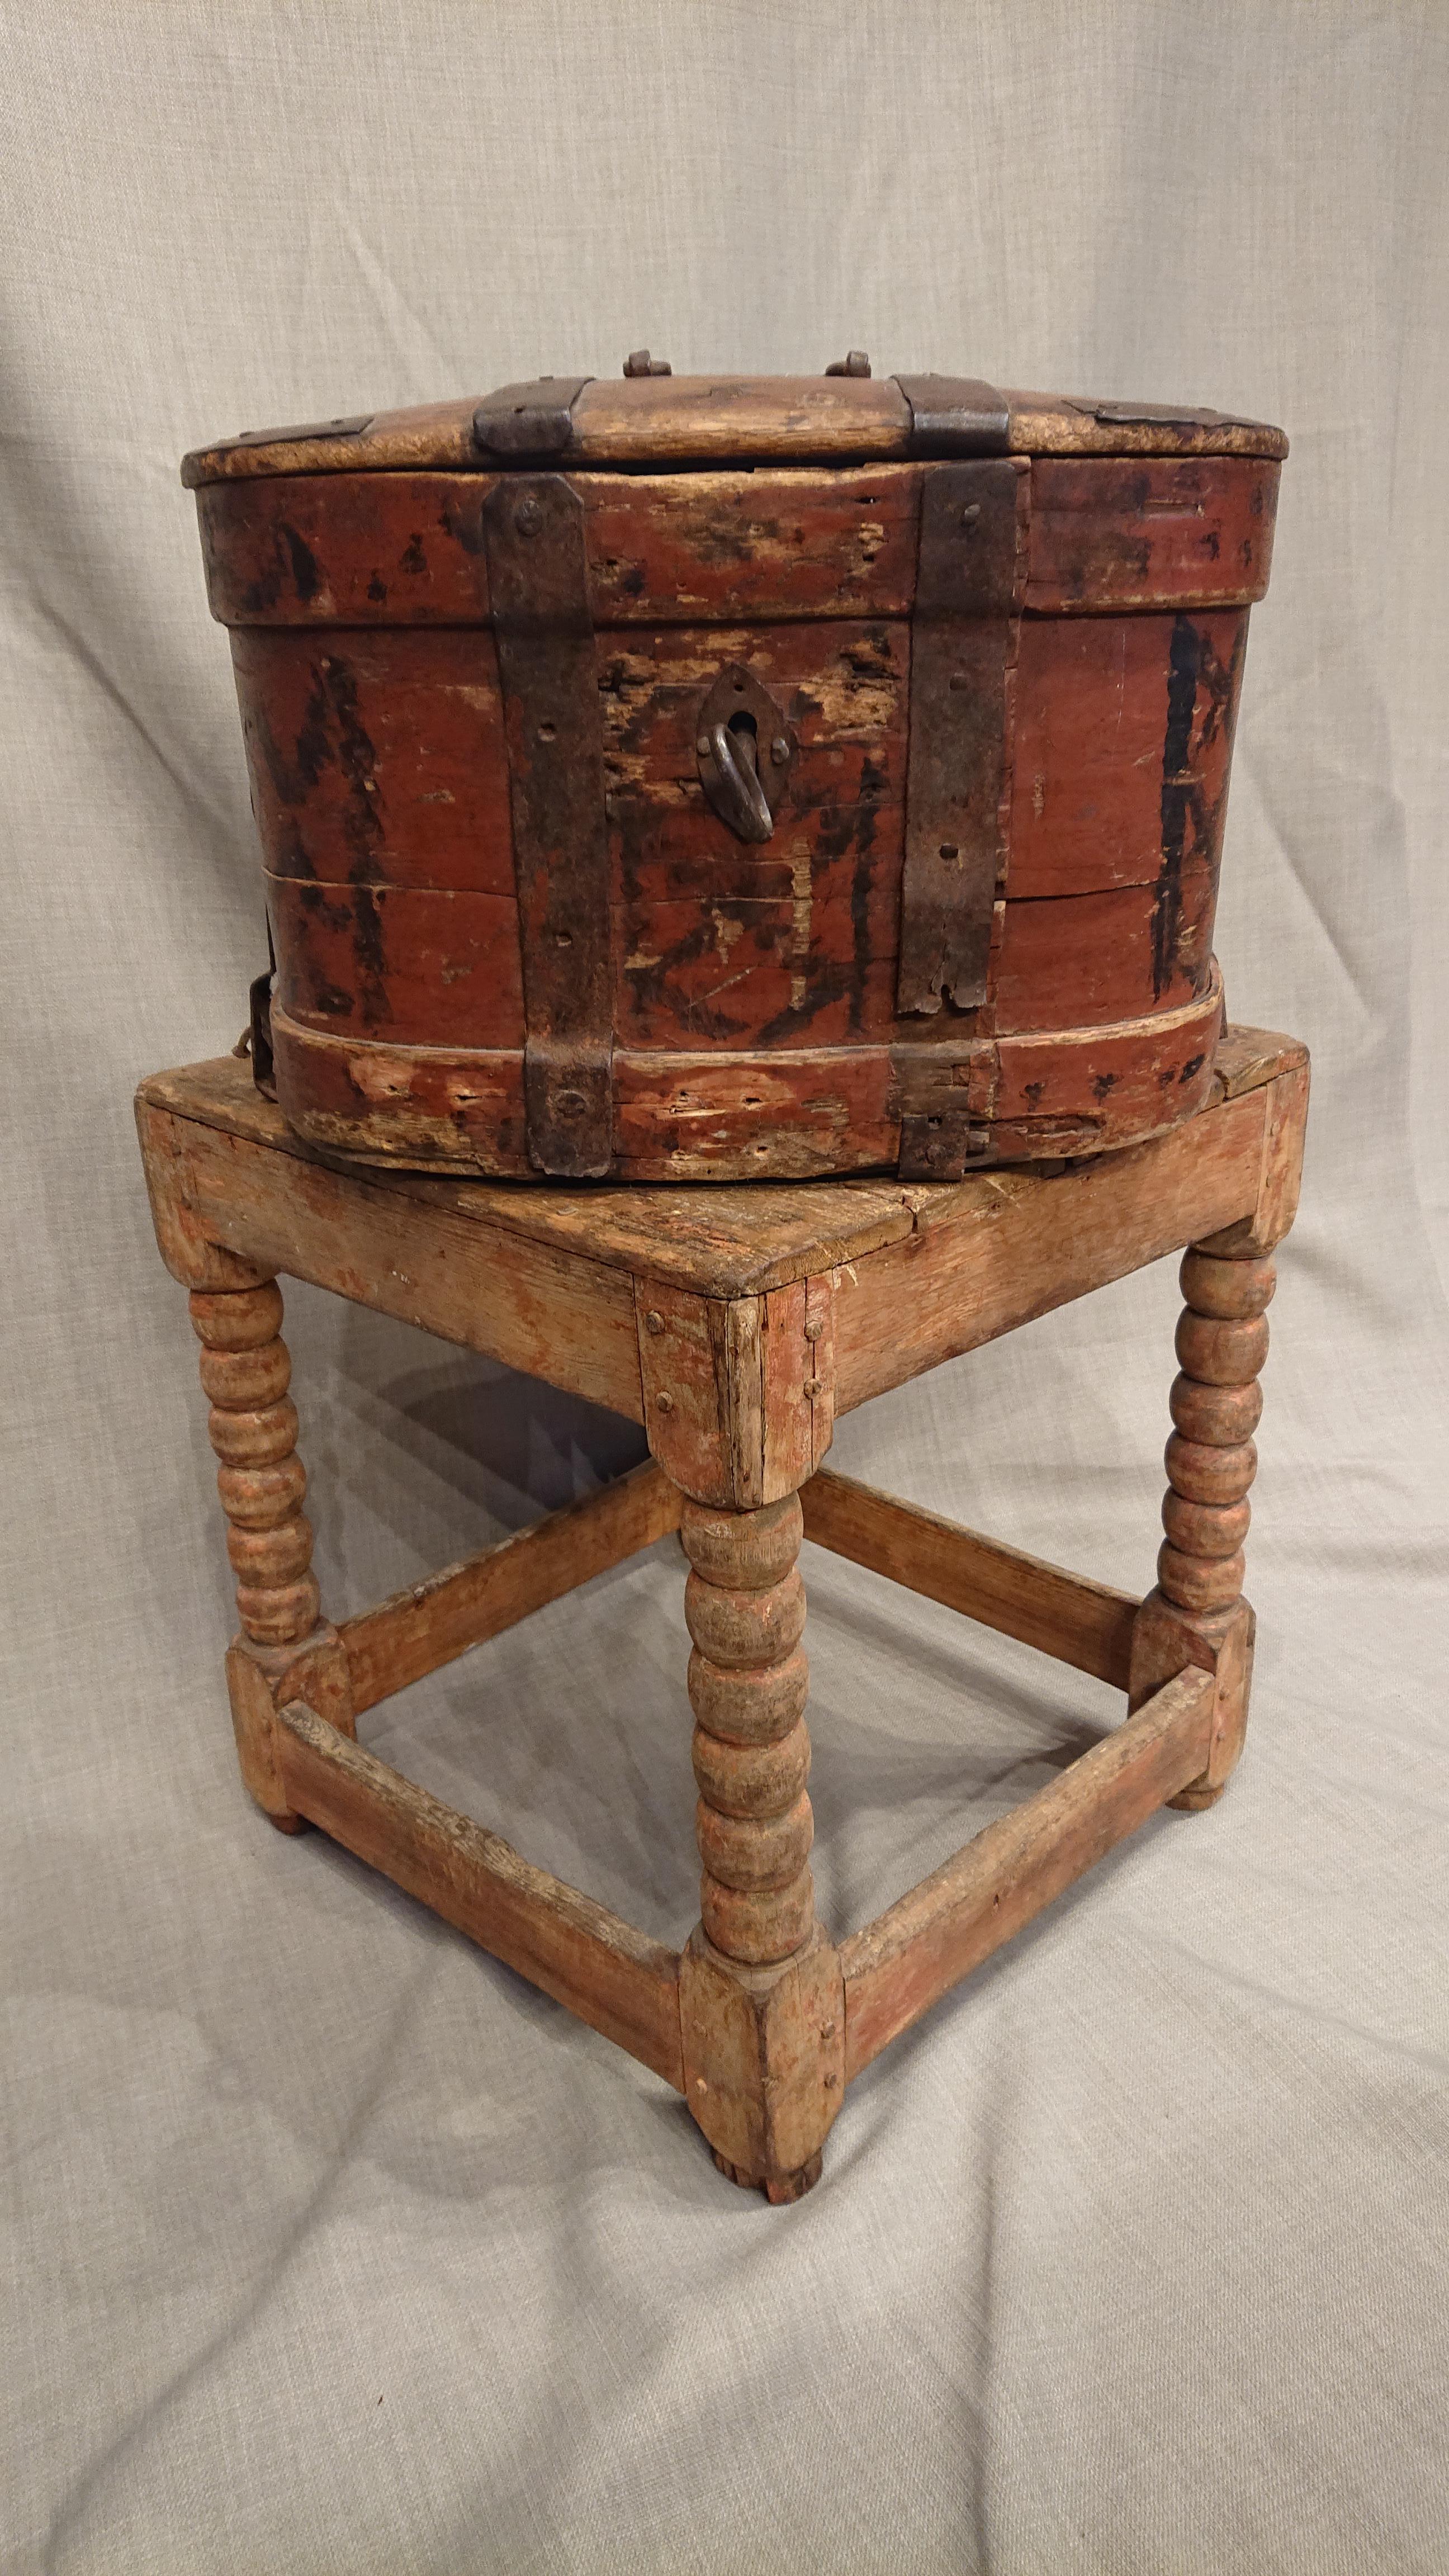 18th century Swedish Baroque stool from Skelleftea Vasterbotten, Northern Sweden.
A rustic & genuine old Baroque stool with fantastic patina & traces of original painting.
Fine Turned legs & stable & good in construction.
Small wood loss on all